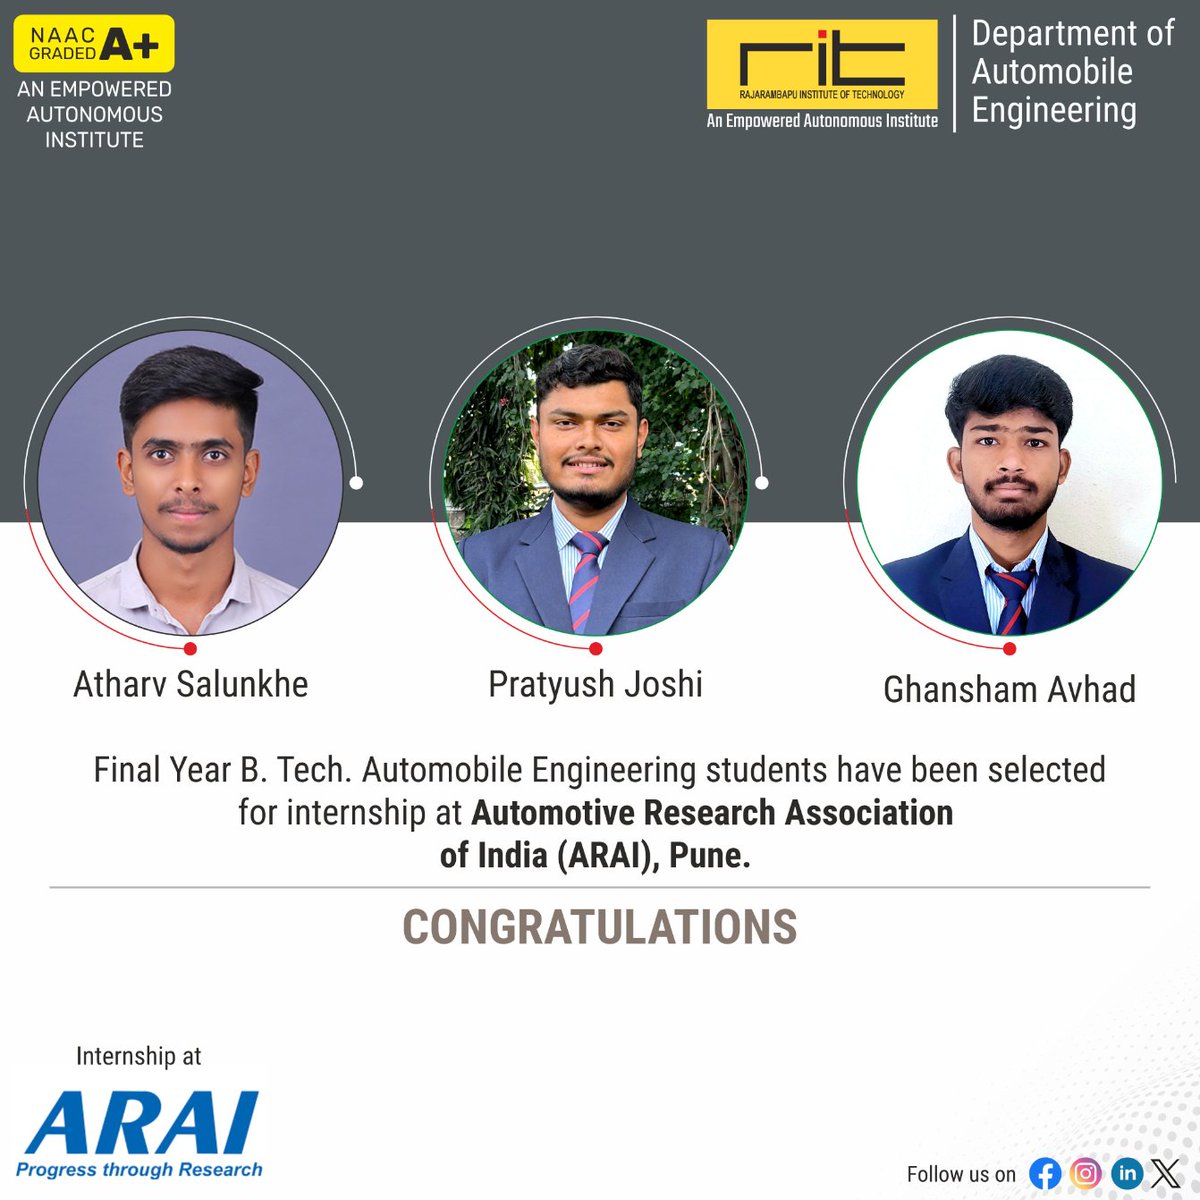 Congratulations!!
Final Year B. Tech. Automobile Engineering students have been selected for internship at Automotive Research Association of India (ARAI), Pune.

#InternshipOpportunity #InternSearch #InternLife #InternshipHunt #SummerInternship #InternExperience #InternshipAlert